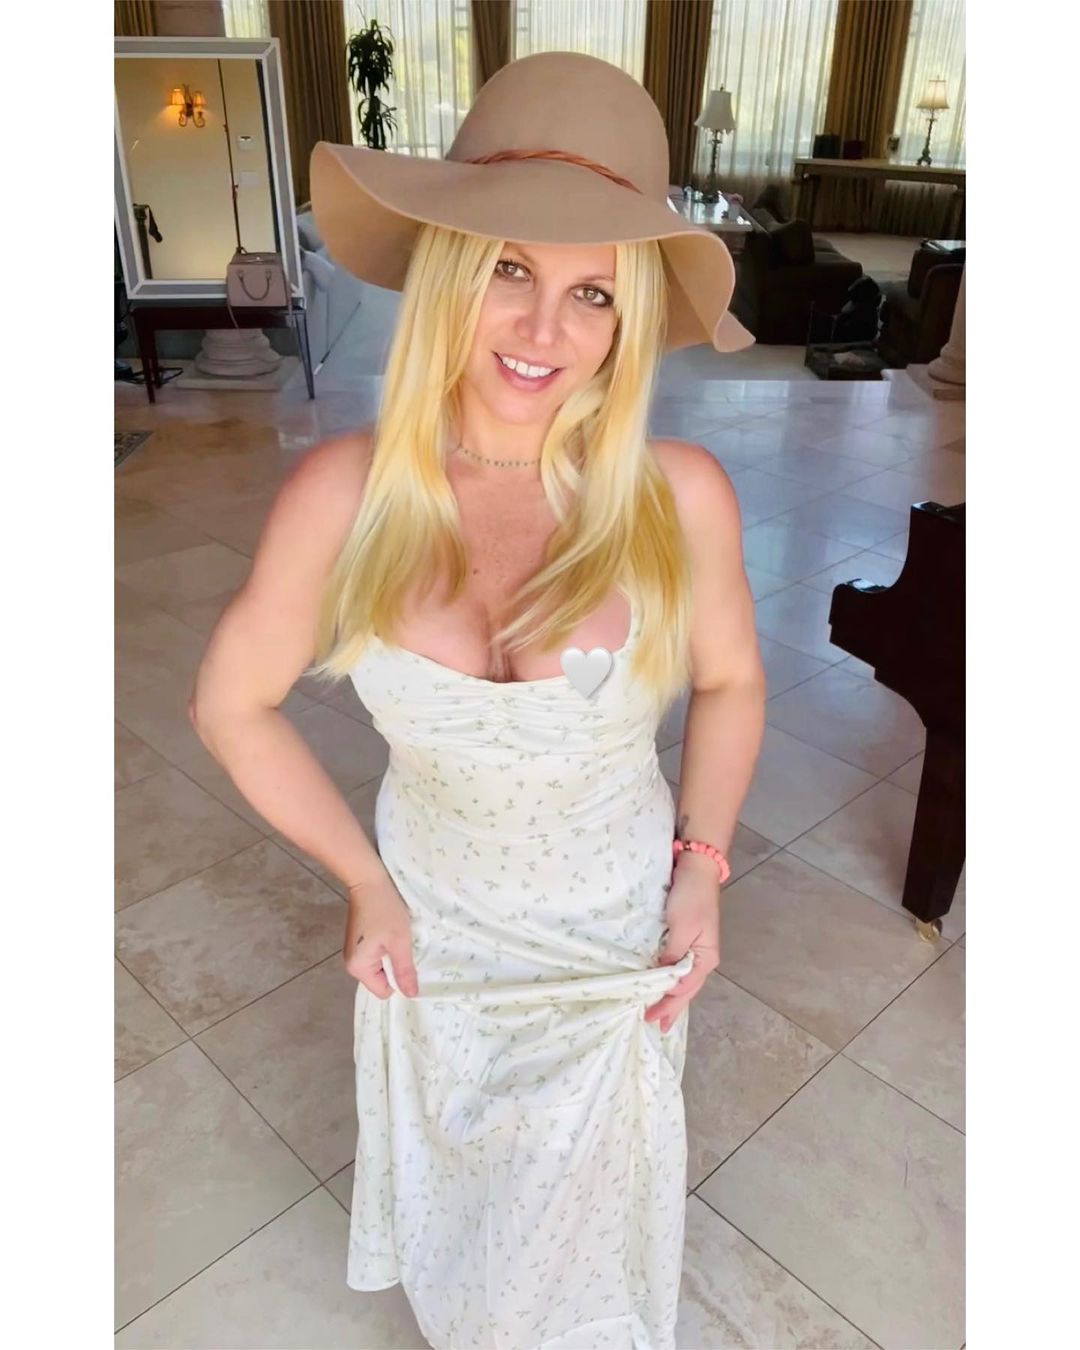 An insider reported that last year, Britney Spears met with her mother but that they still hadn't fully reconciled because there was "a lot of pain" . (Photo: Instagram)